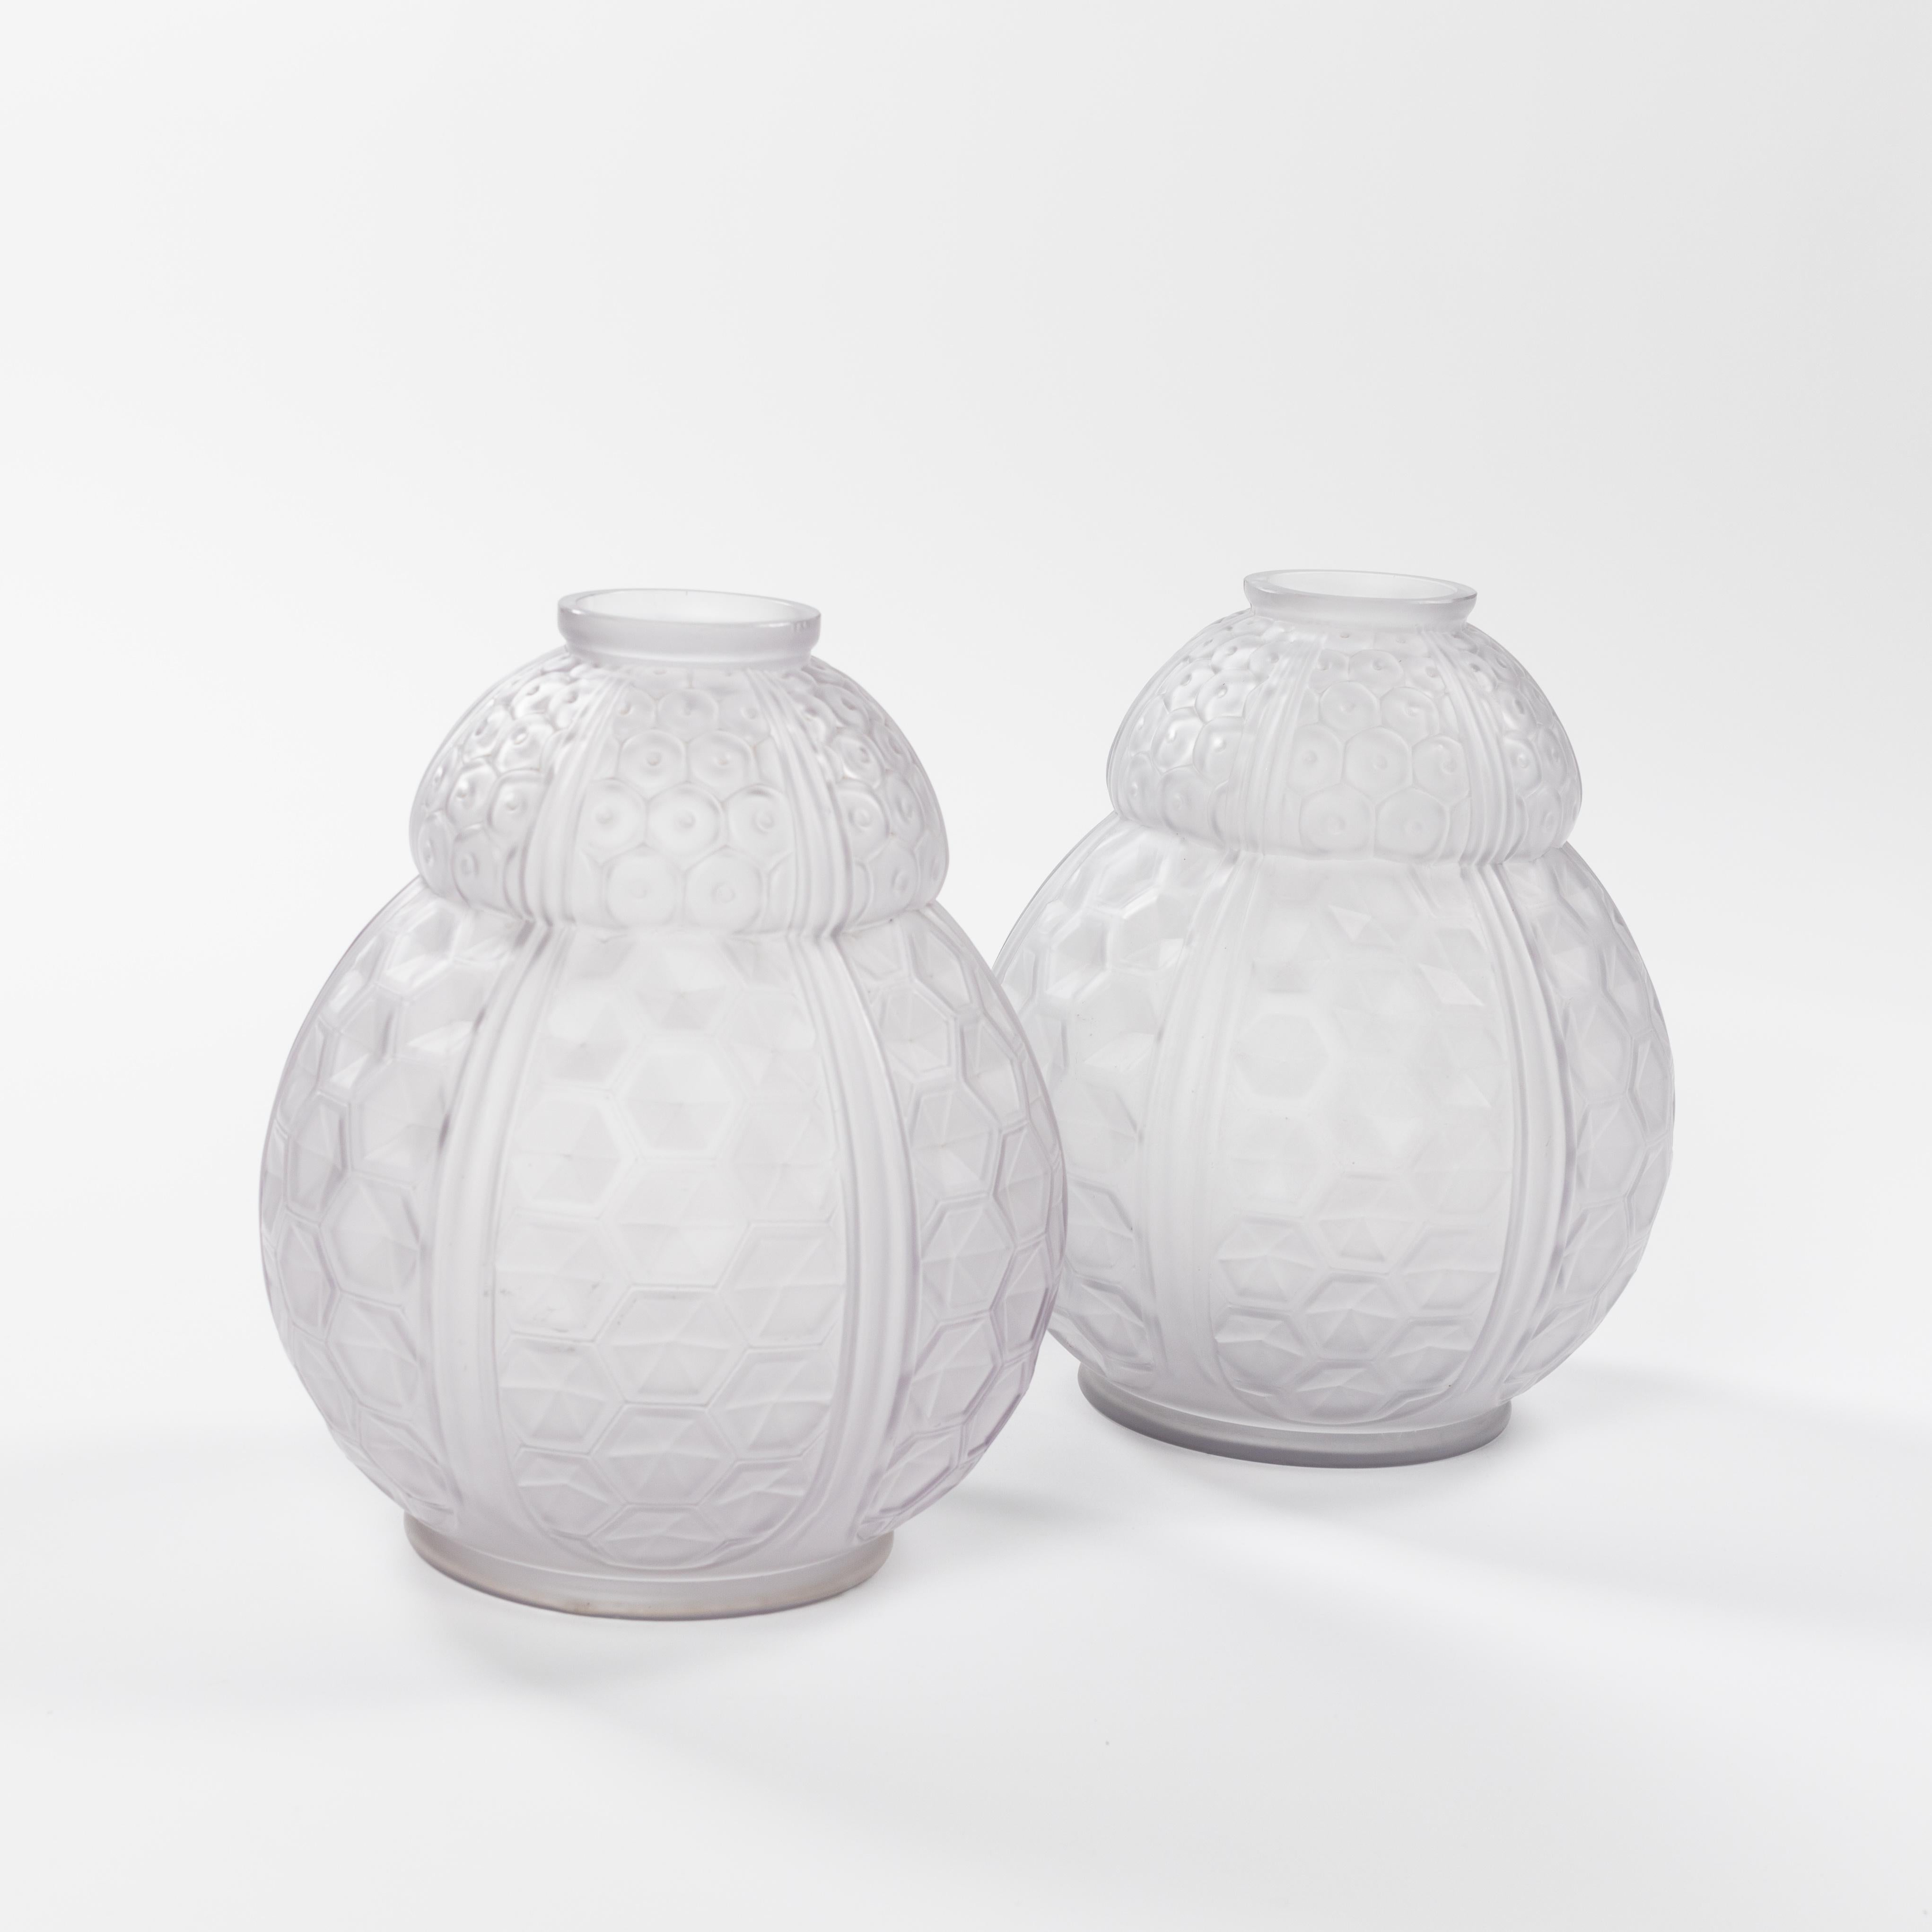 Pair of very decorative, bulbous pressed art-glass vases by Oreor, signed. 
Pressed glass with plastic geometric art deco motif in almost transparent glass and relief-like outer structure.
The color has a light violet-grey tone, the plasticity of